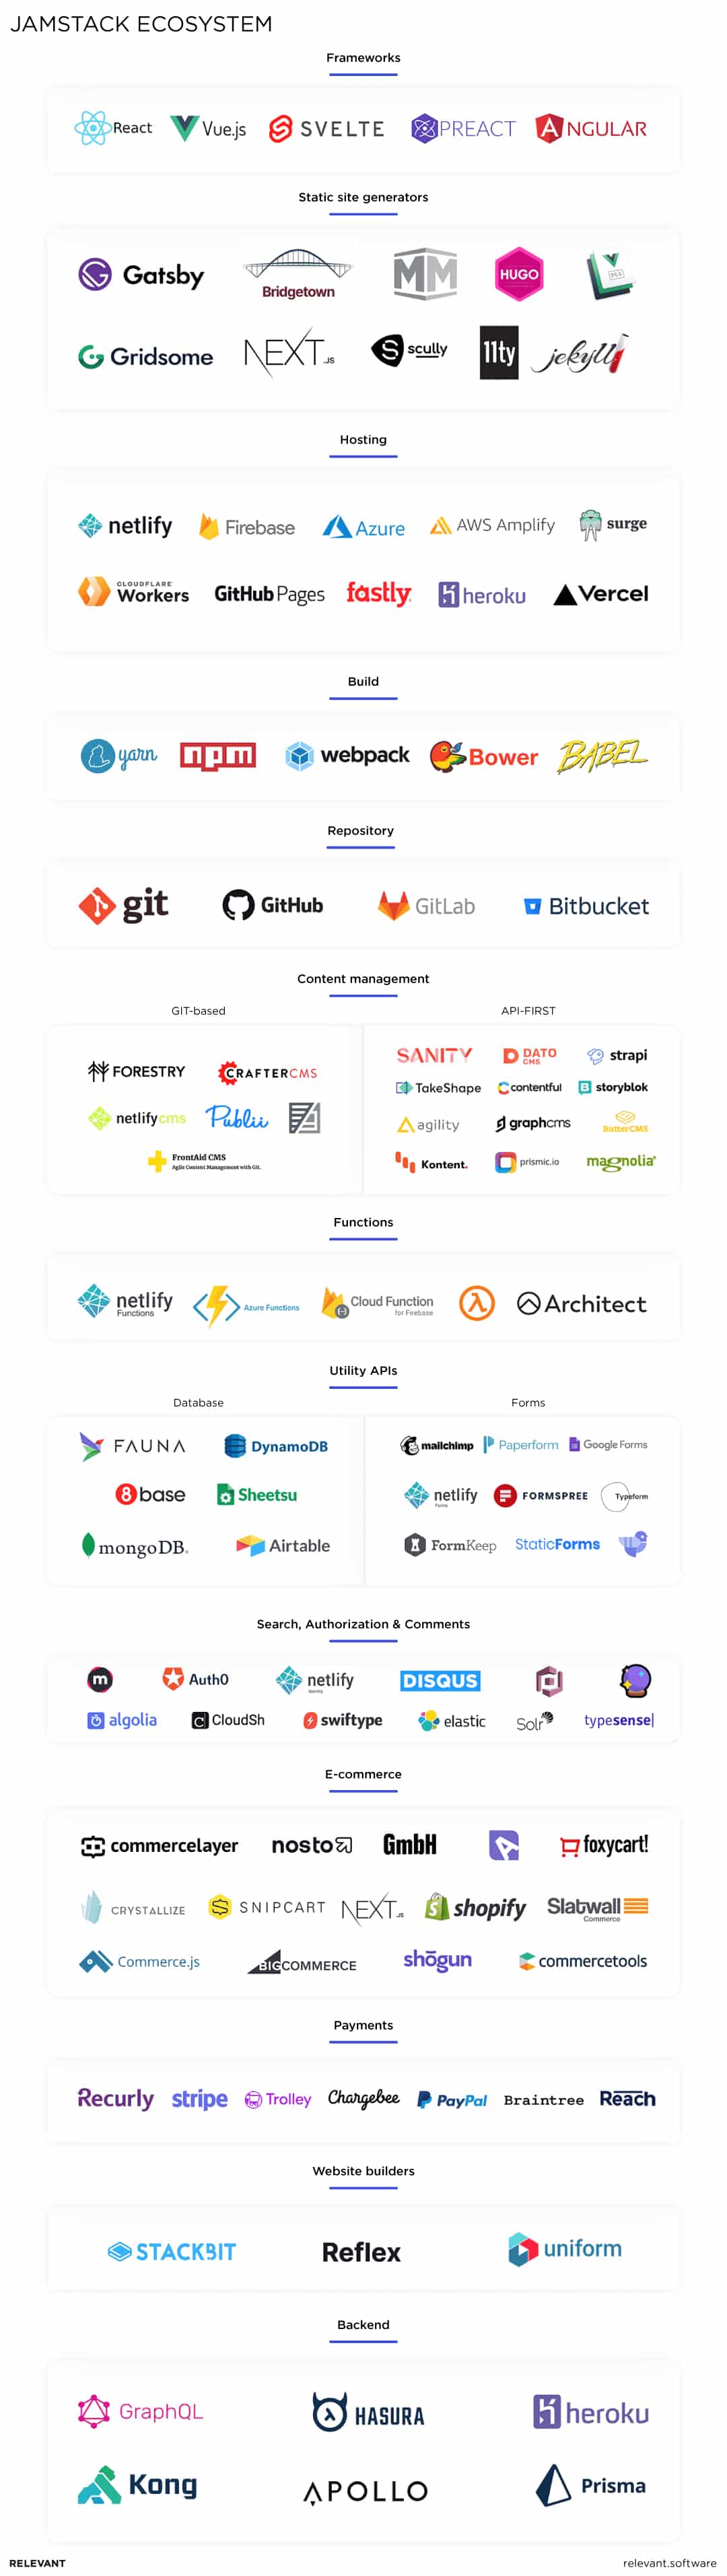 JAMStack ecosystem, jamstack tools, hosting, headless cms, payments, backend, apis